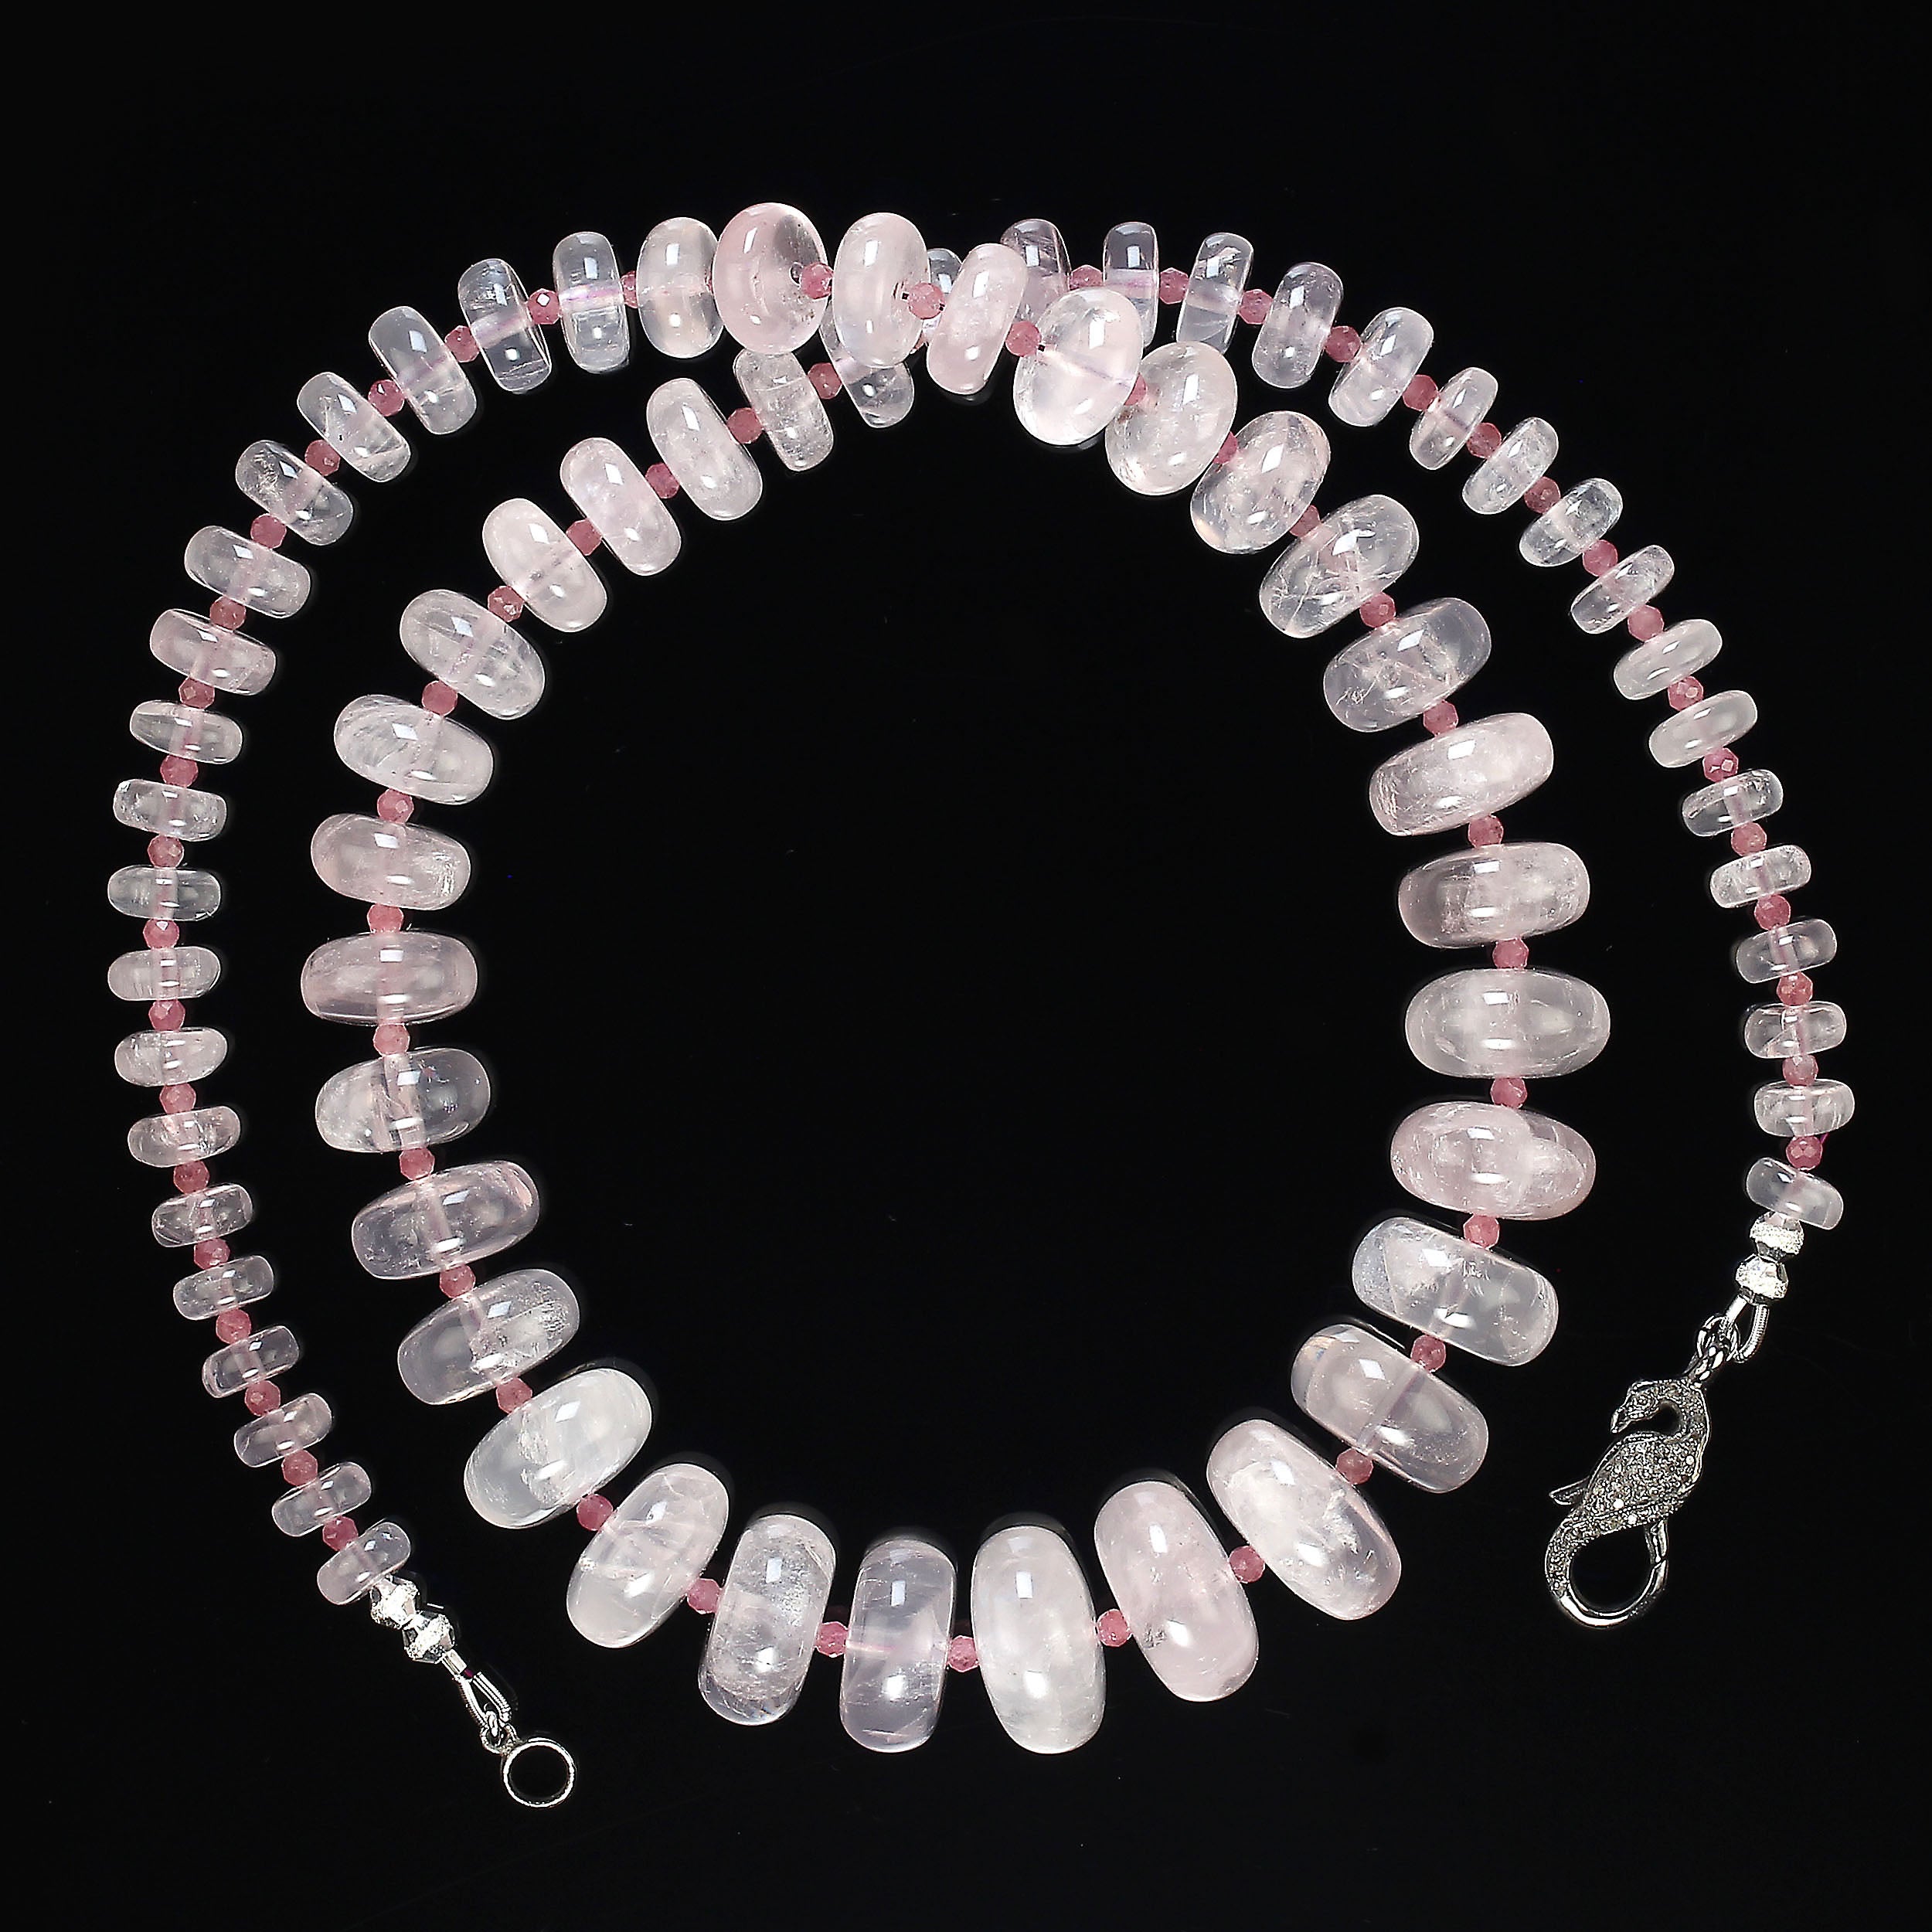 Happy Valentine's Day Gift!
Gorgeous transparent smooth rondelles of rose quartz in this 24-inch necklace.  The rose quartz is accented with faceted darker 3mm pink tourmaline. These rose quartz graduate 8 to 18 mm.  This elegant necklace is secured